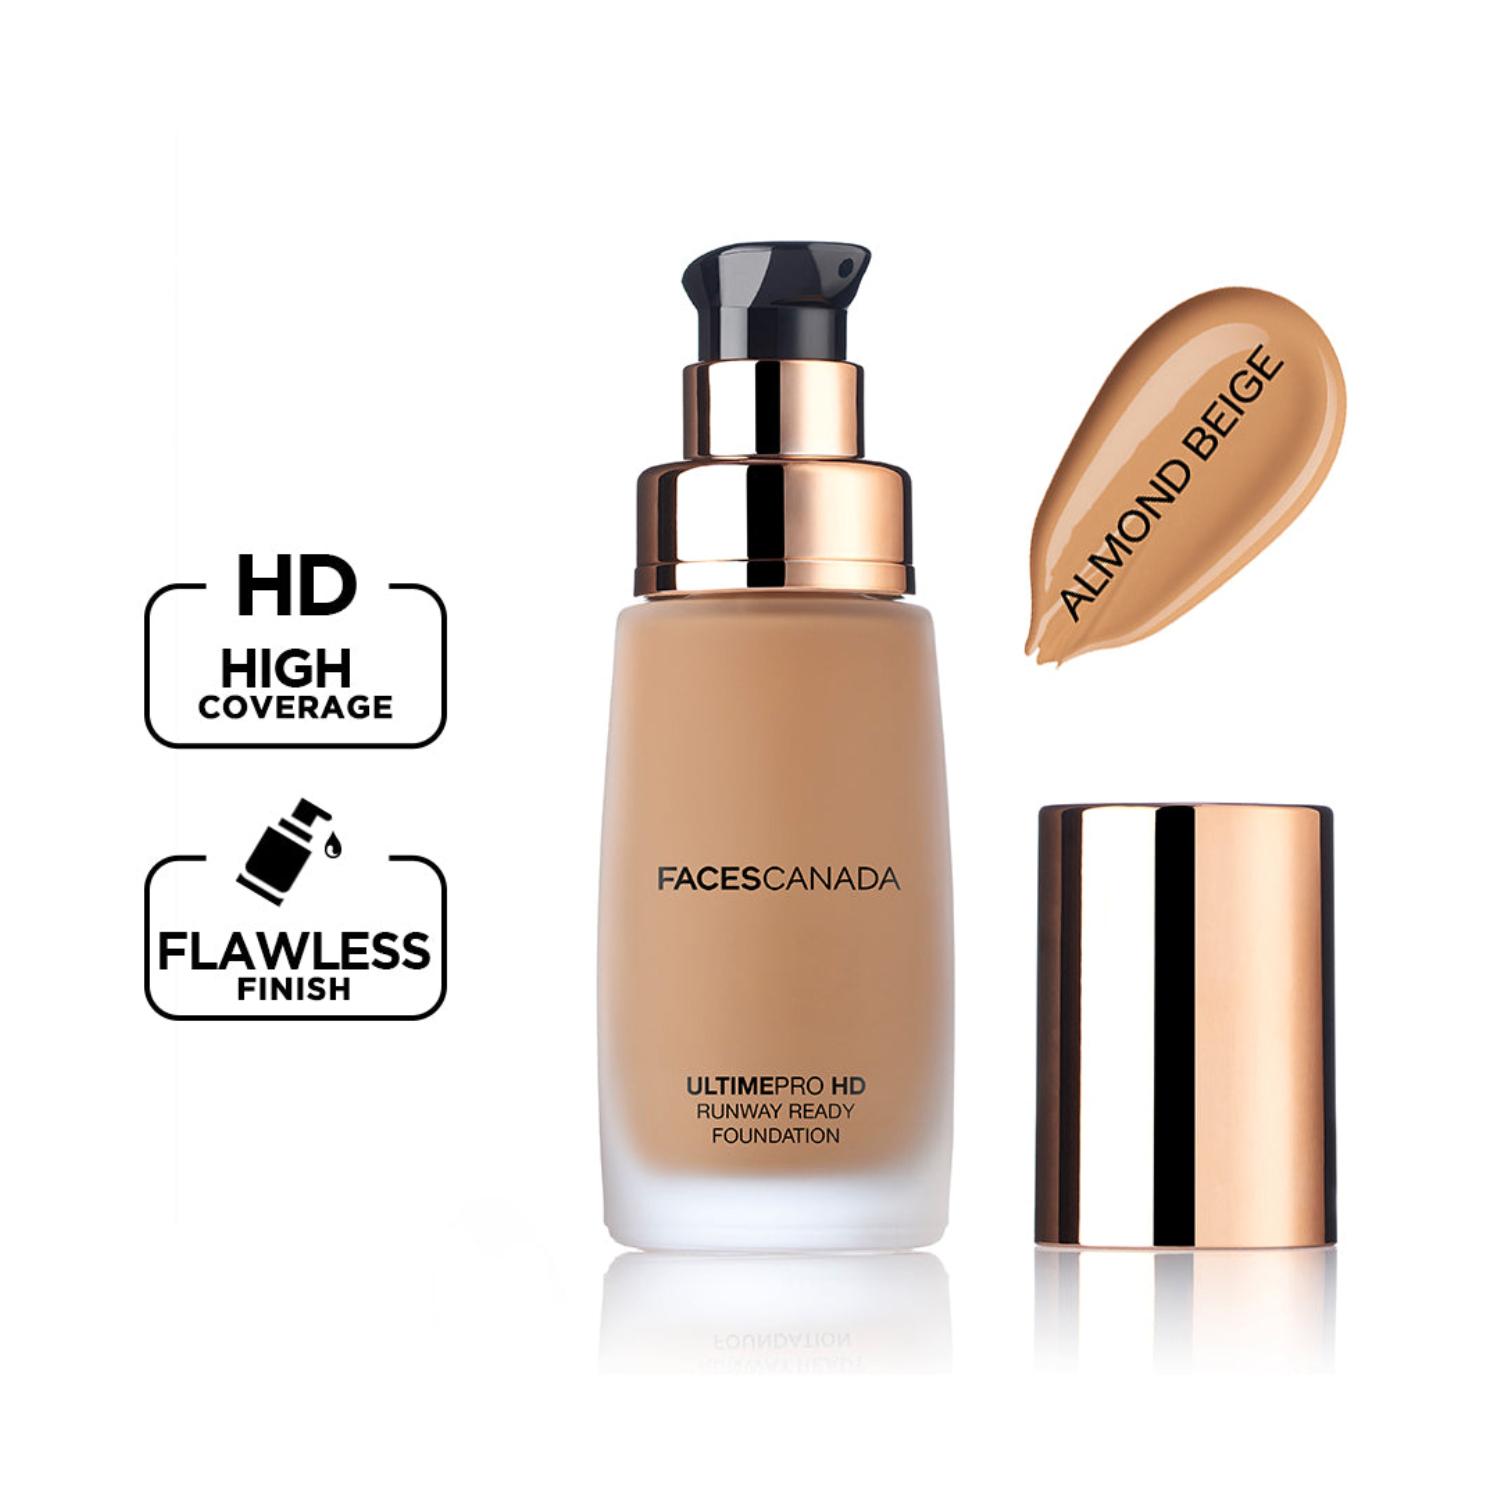 Faces Canada | Faces Canada Ultime Pro HD Runway Ready Foundation - Almond Beige, Radiant Flawless Finish (30 ml)